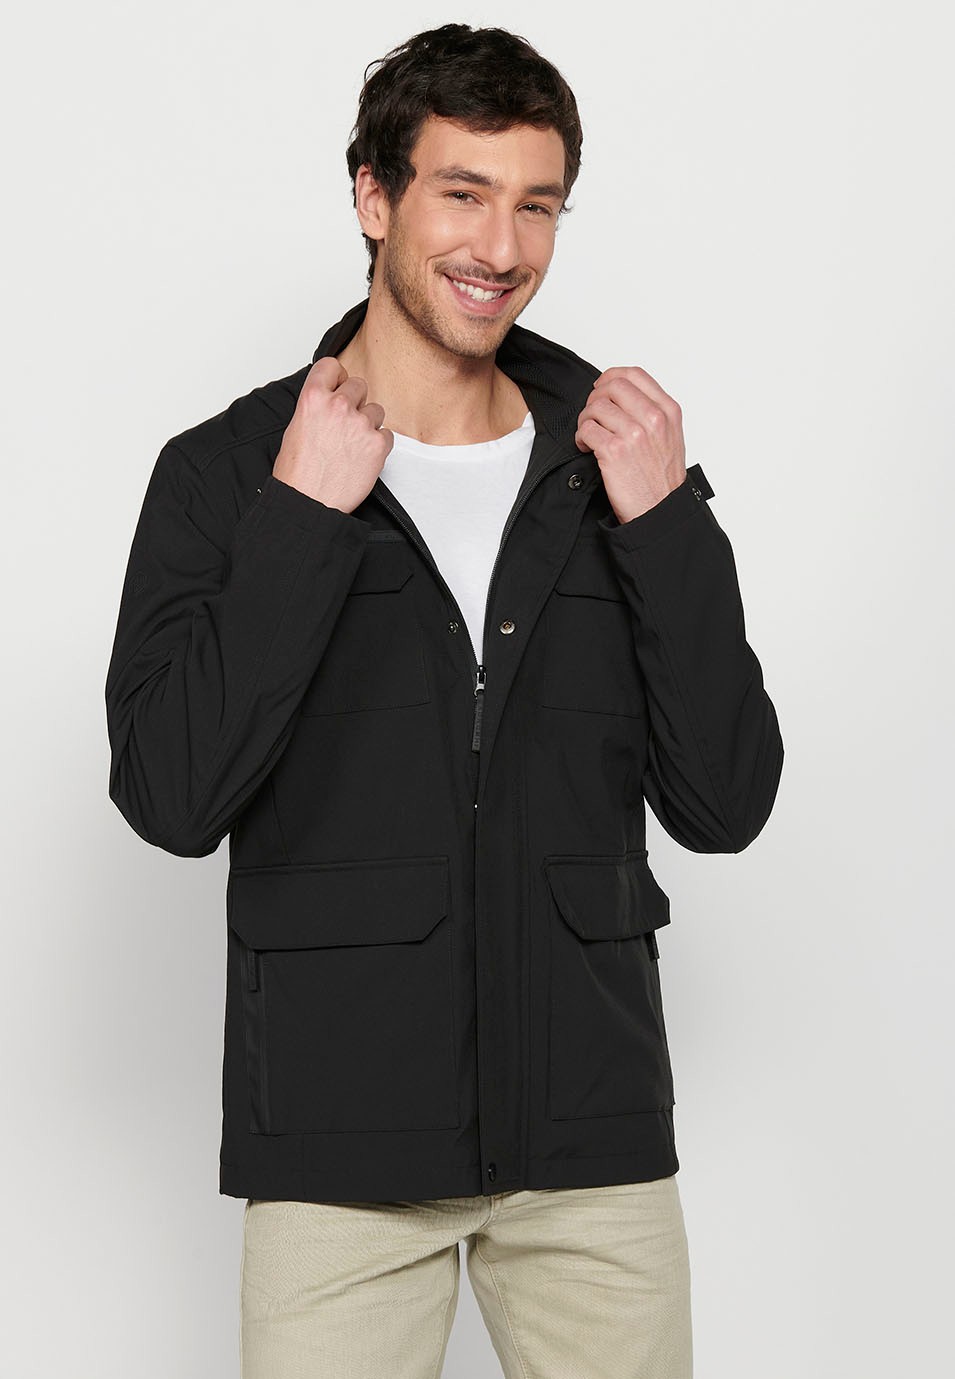 Long Black High Neck Windbreaker Jacket with Front Zipper Closure and Four Flap Pockets for Men 5